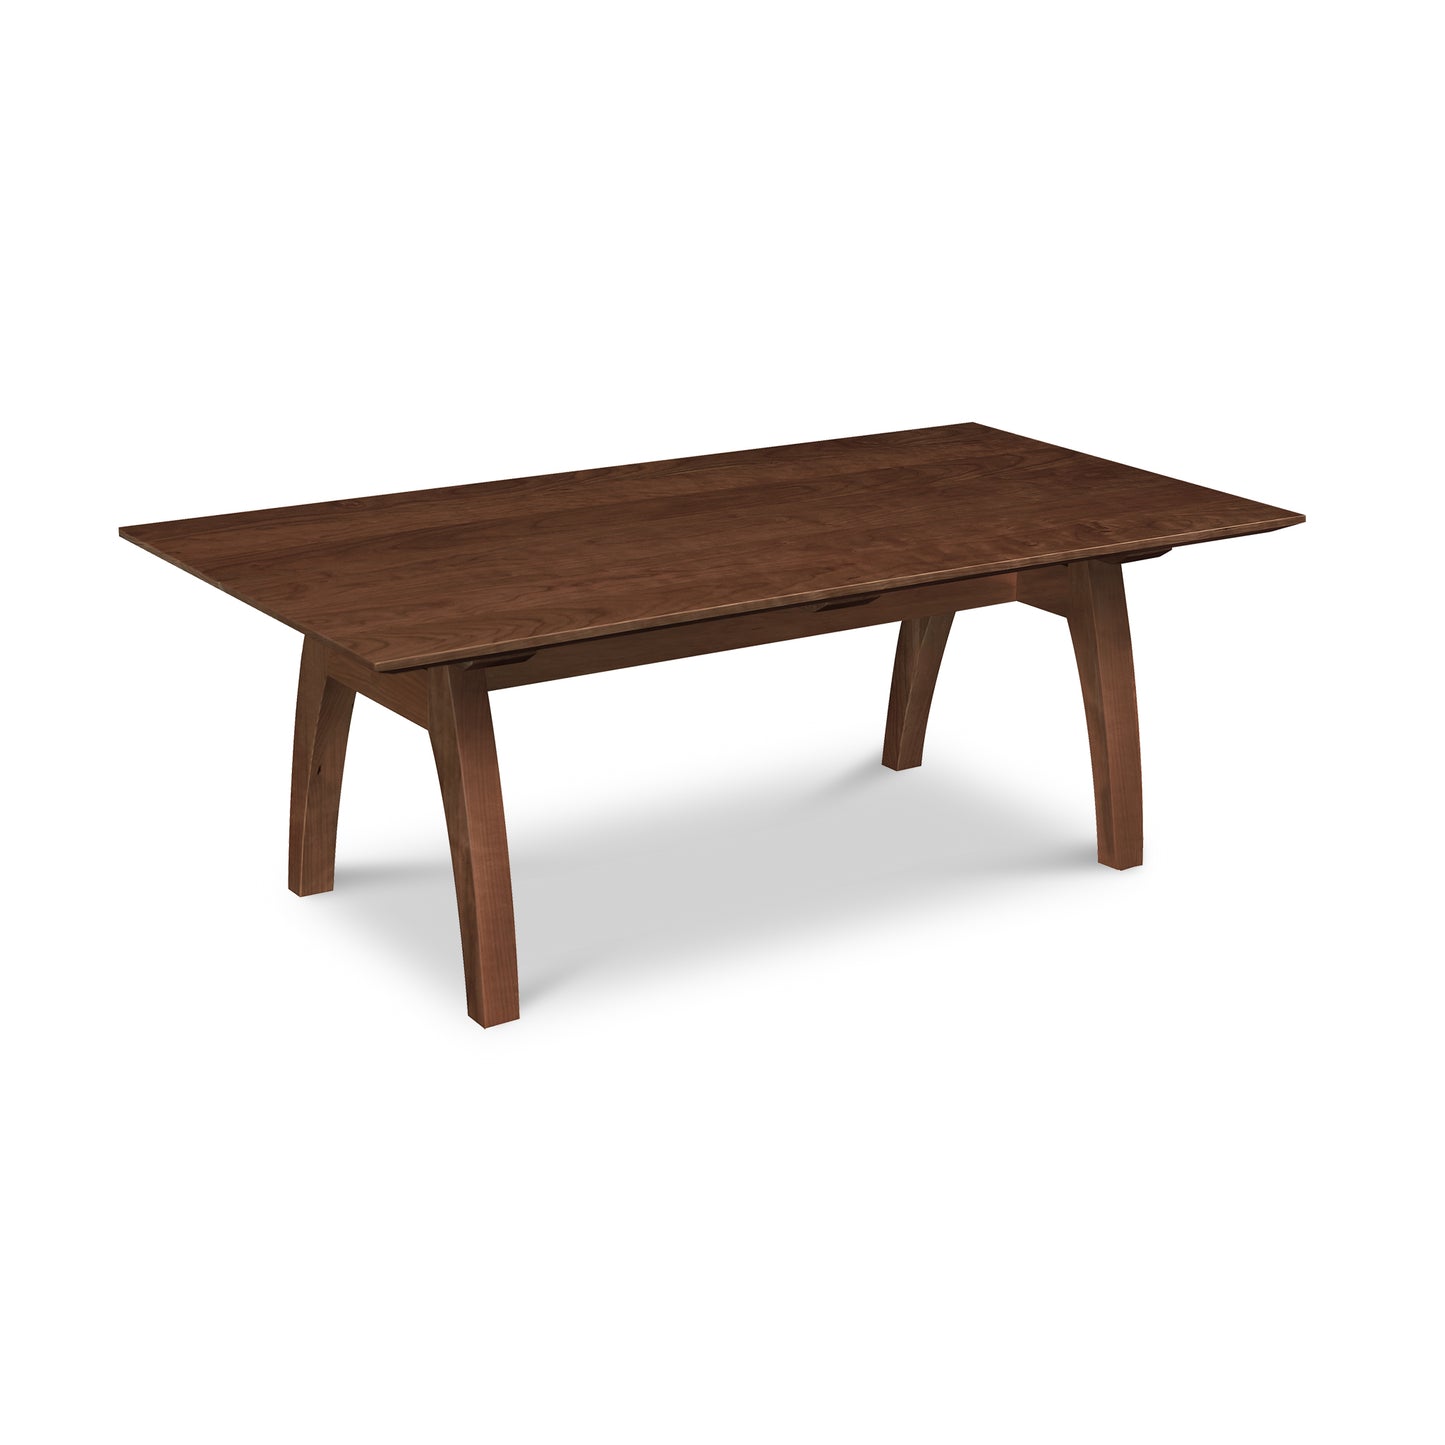 A handmade Lyndon Furniture Vermont Modern Trestle Coffee Table with a wooden base.